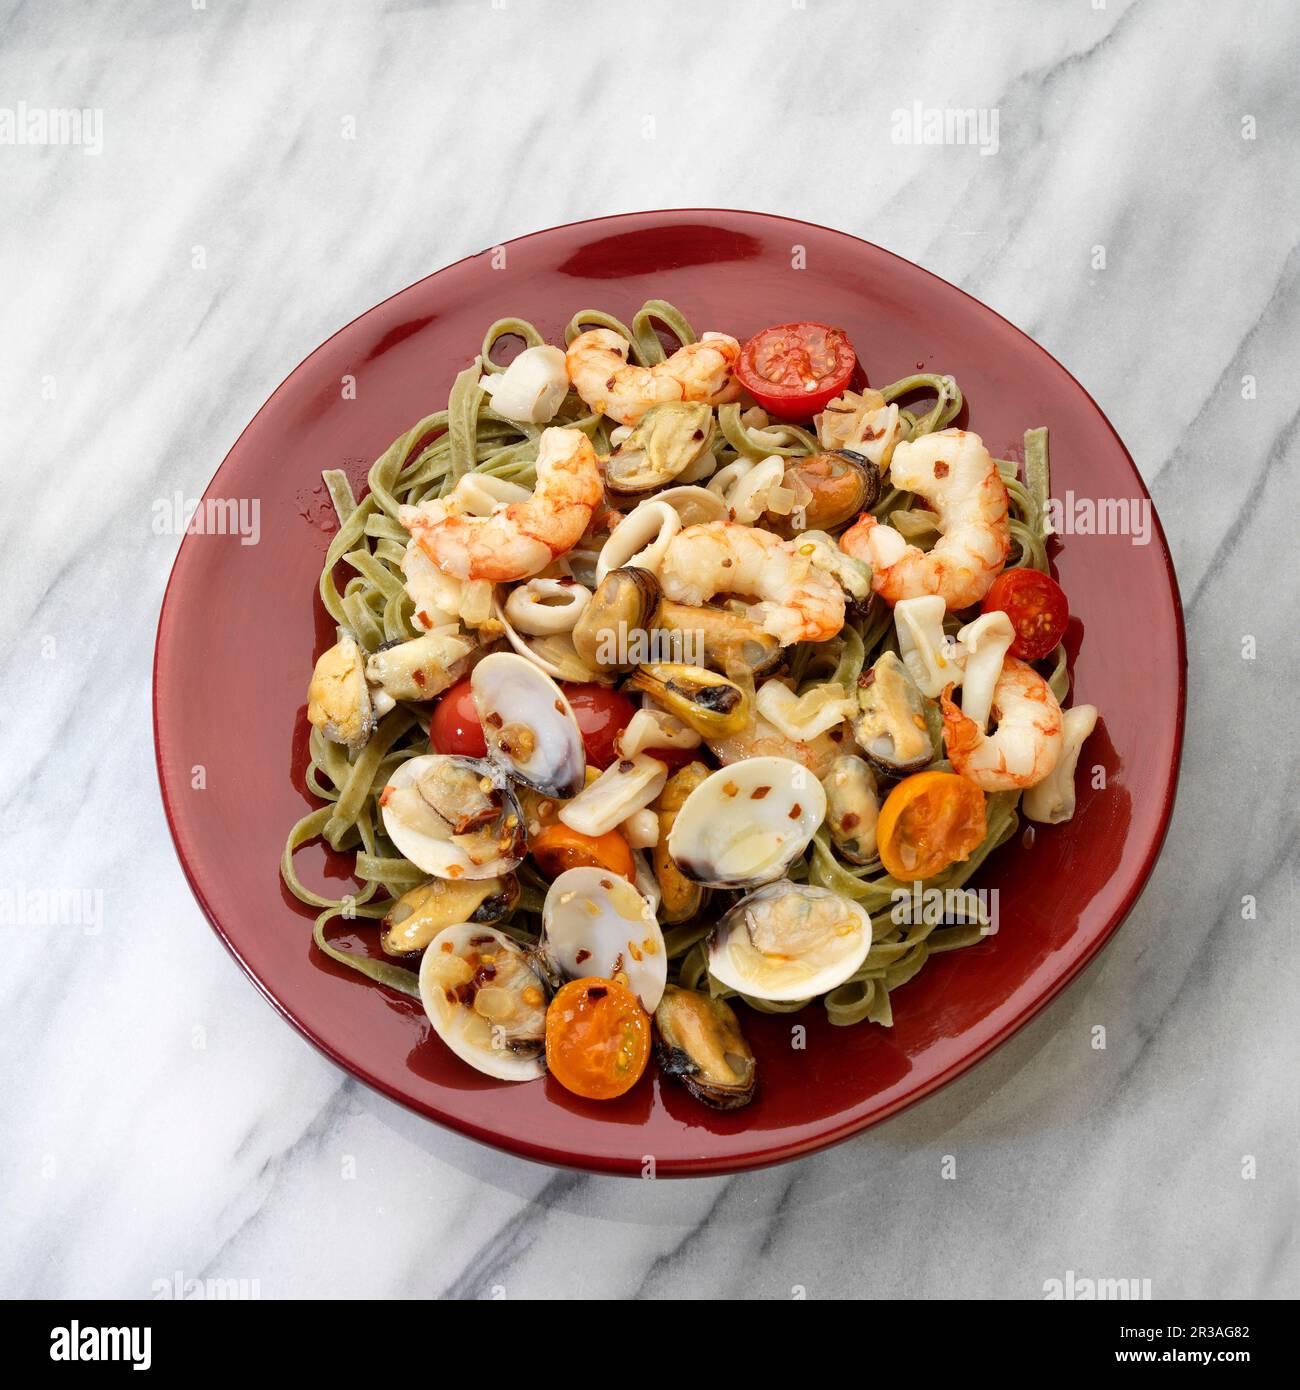 Mediteranian seafood, white wine, shrimp, mussels, clams, calamari, tomatoes in plate on white Stock Photo